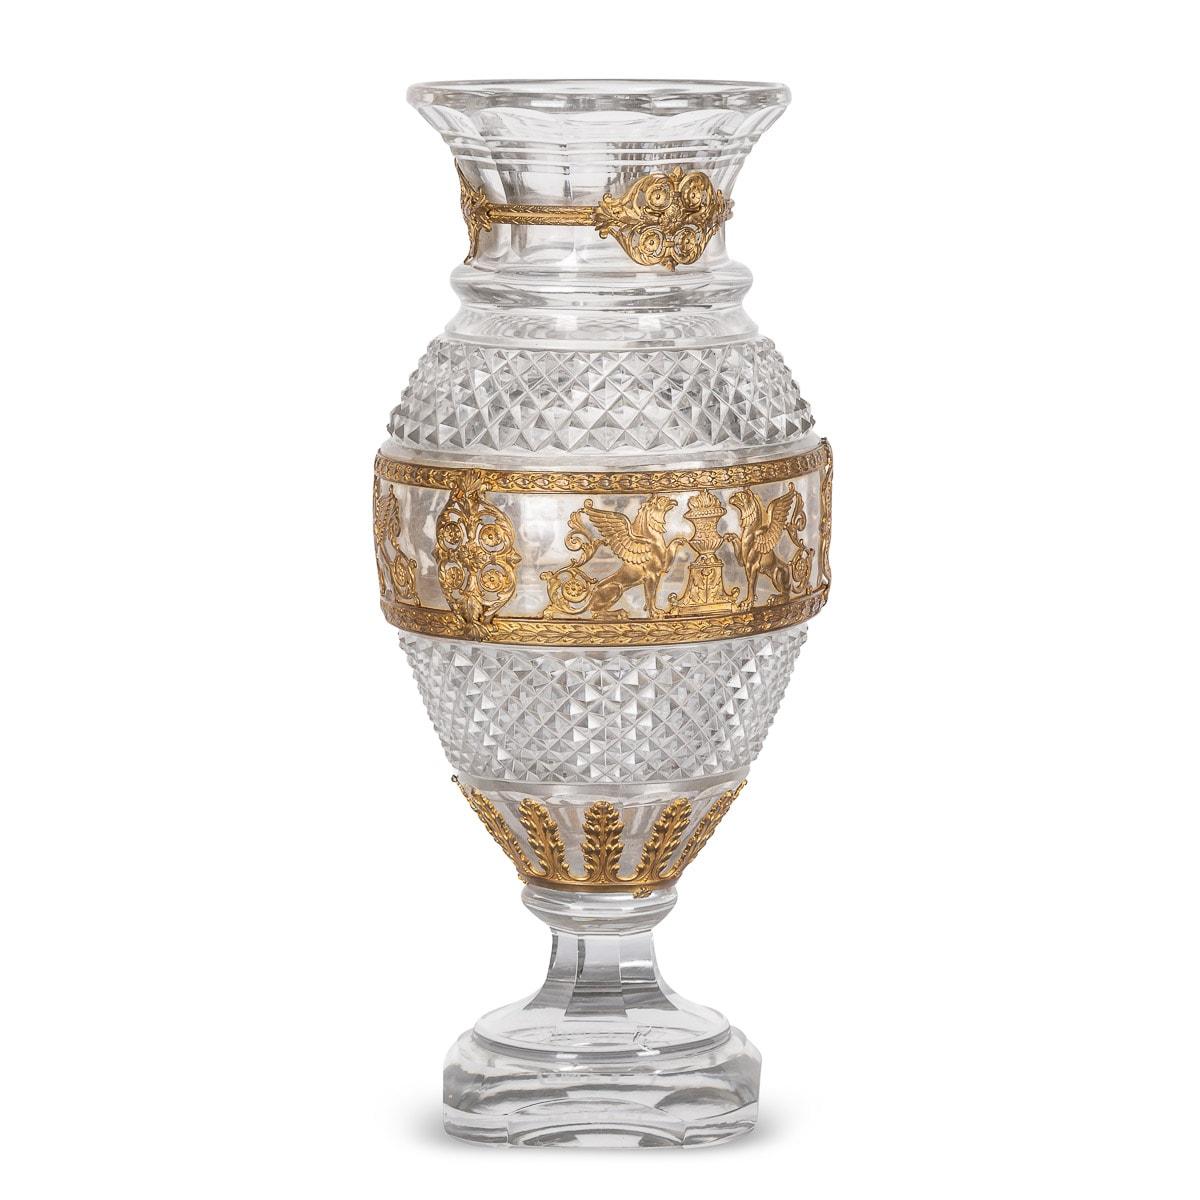 20th Century French Gold Plated & Baccarat Glass Vase, c.1900 For Sale 1